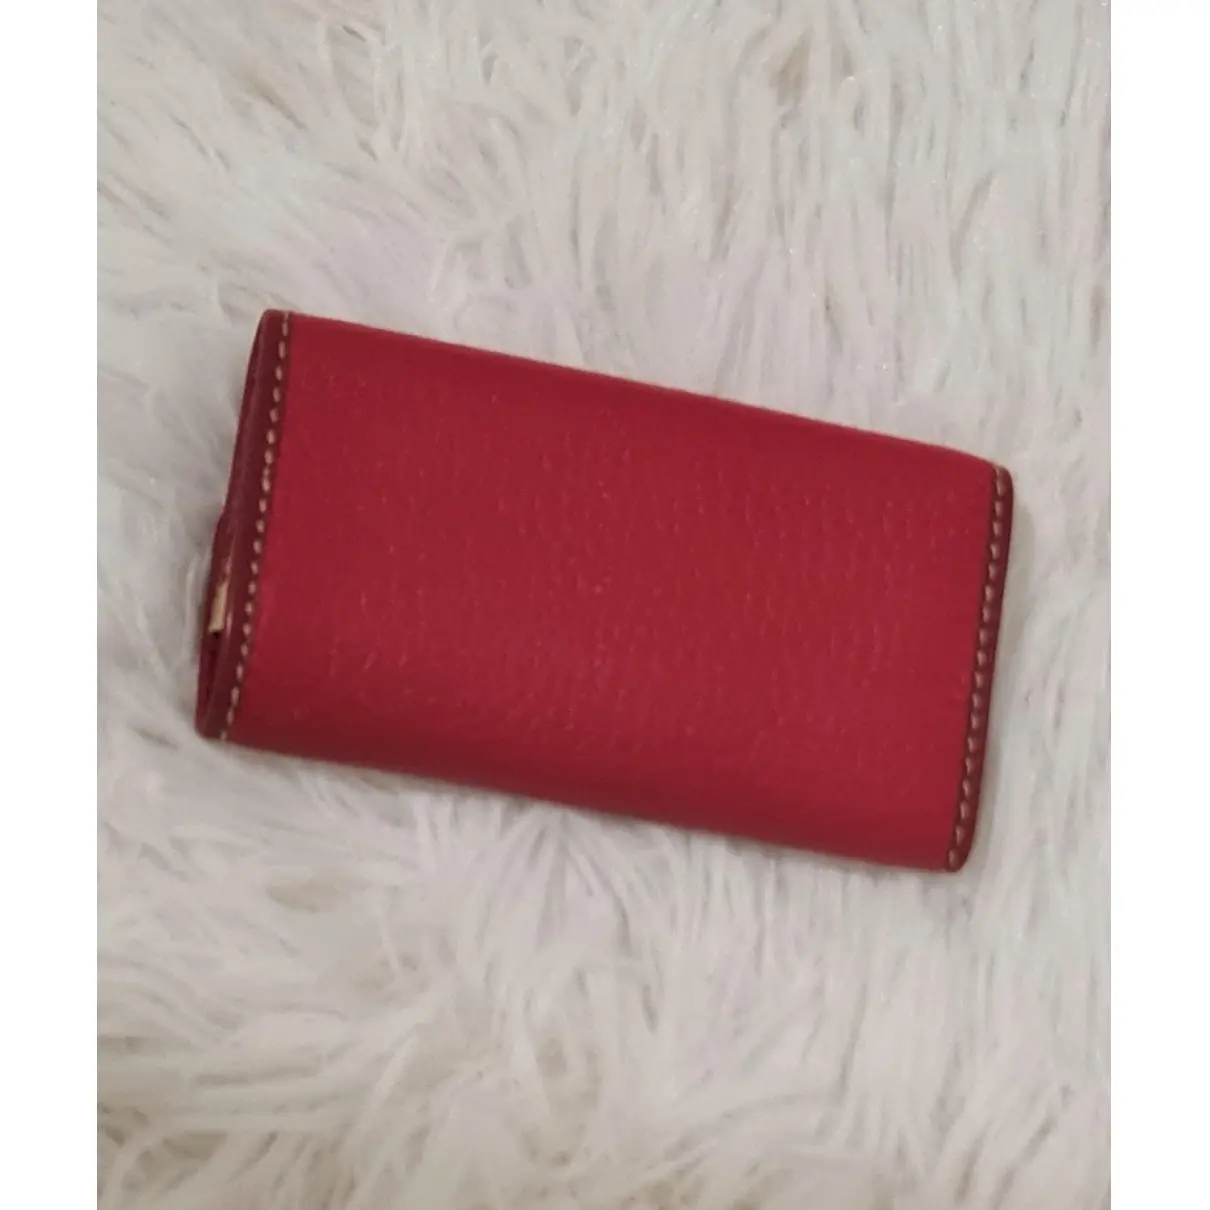 Buy Gucci Leather key ring online